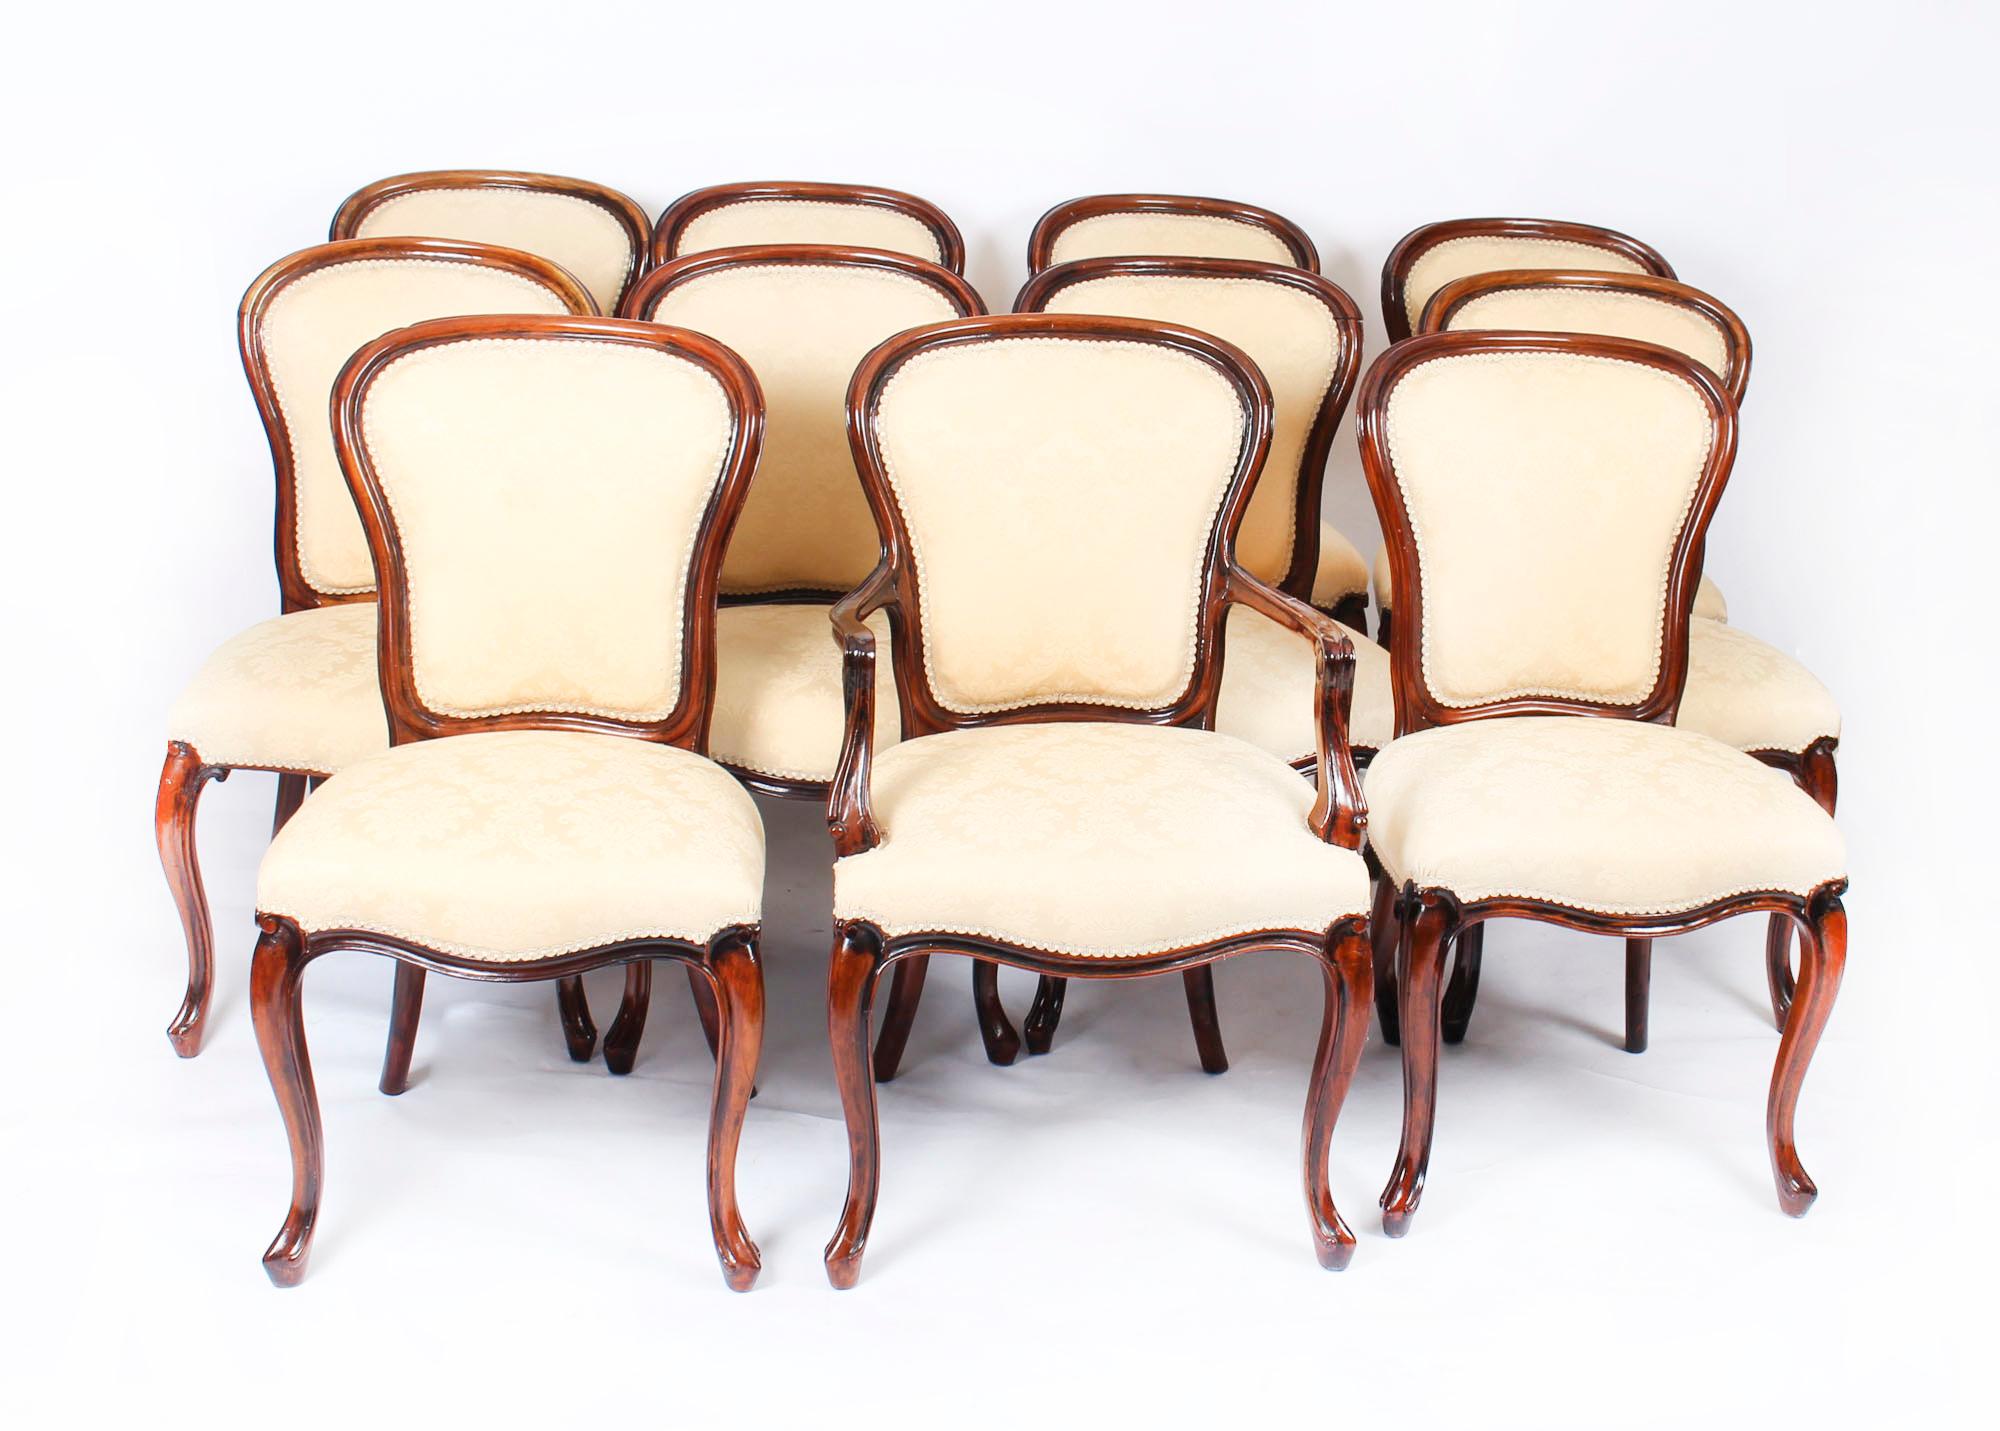 Antique Set of 10 Louis Revival Cabriole Dining Chairs 19th Century 6